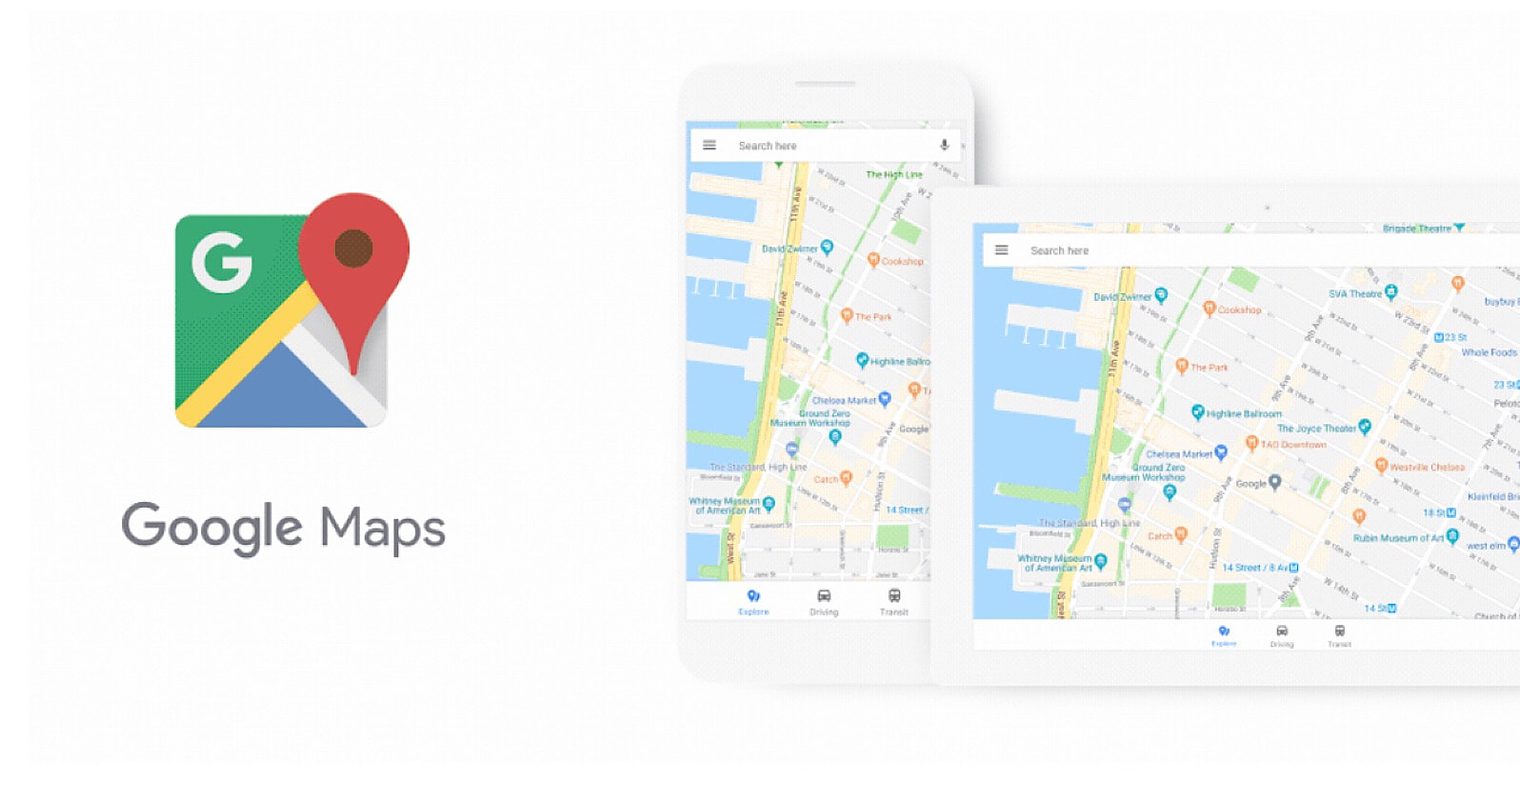 Google Maps Improves Location Discovery by Color Coding Points of Interest